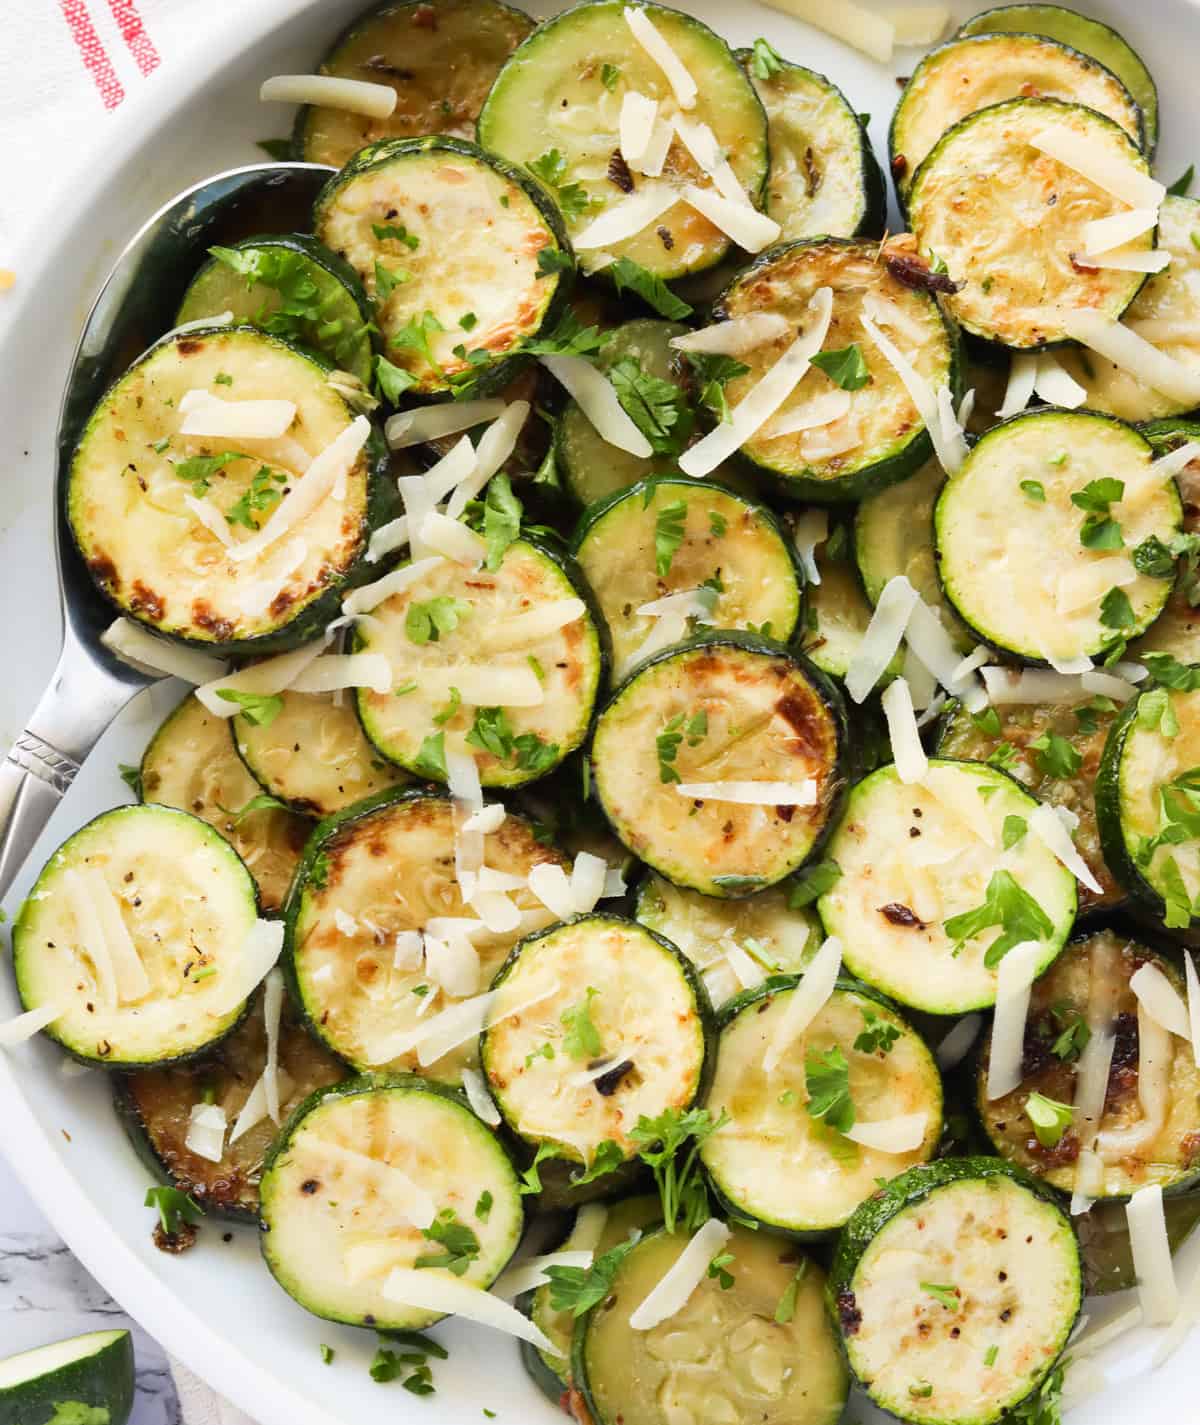 Zucchini with parmesan